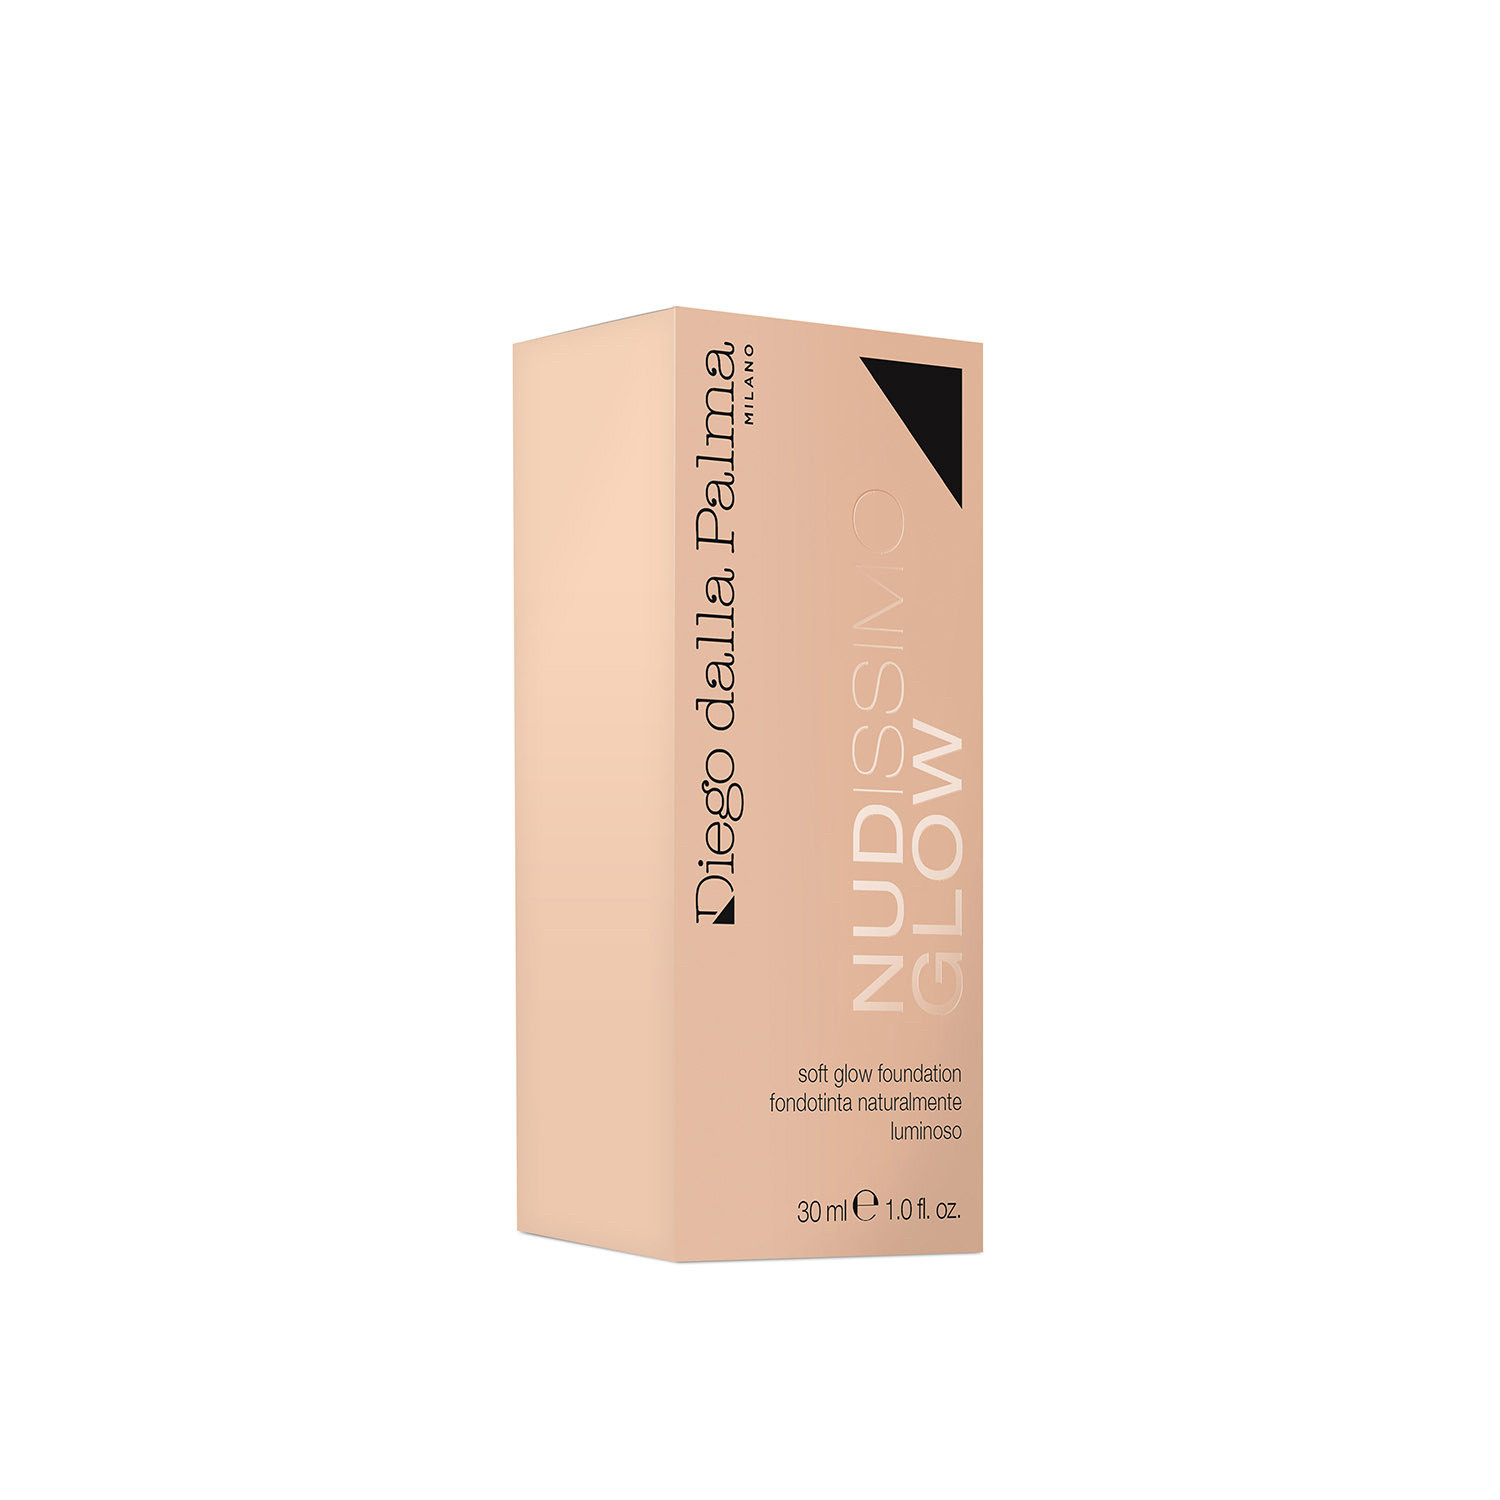 Nudissimo Foundation NUDISSIMO GLOW - 255W, Beige, large image number 2